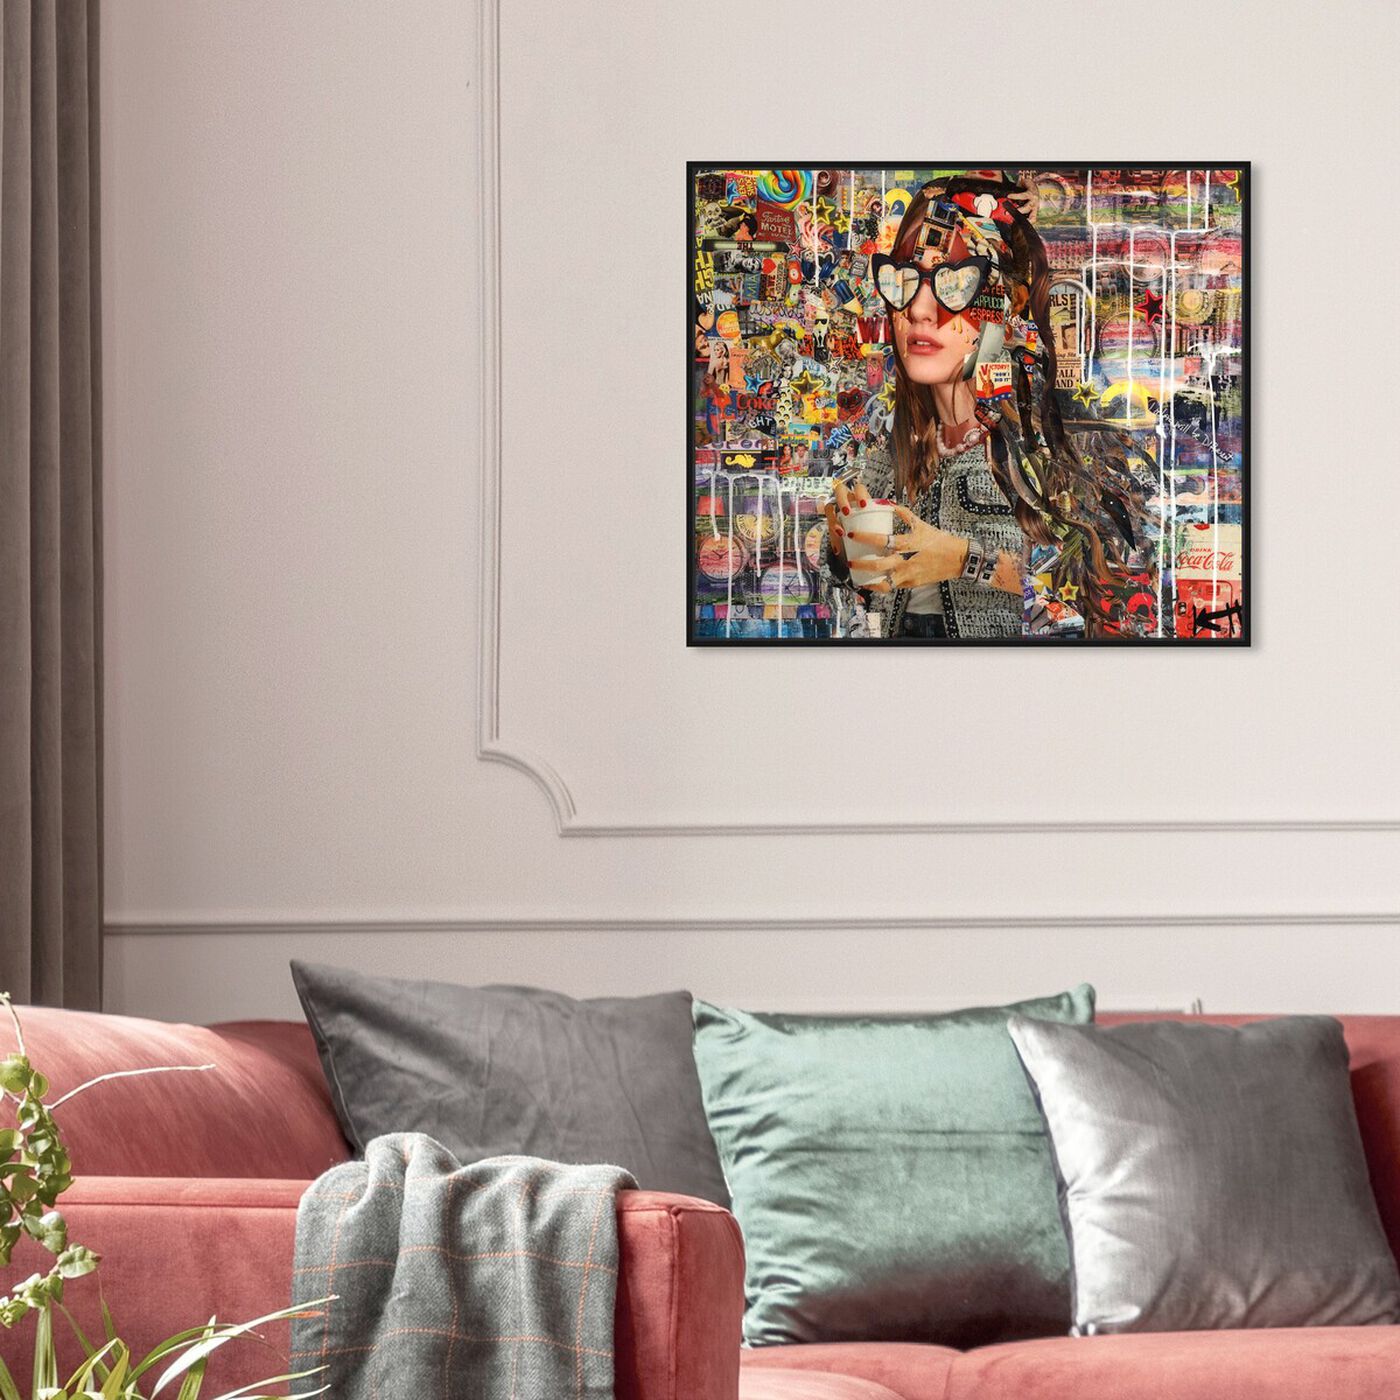 Hanging view of Katy Hirschfeld - Heart Eyes featuring fashion and glam and portraits art.